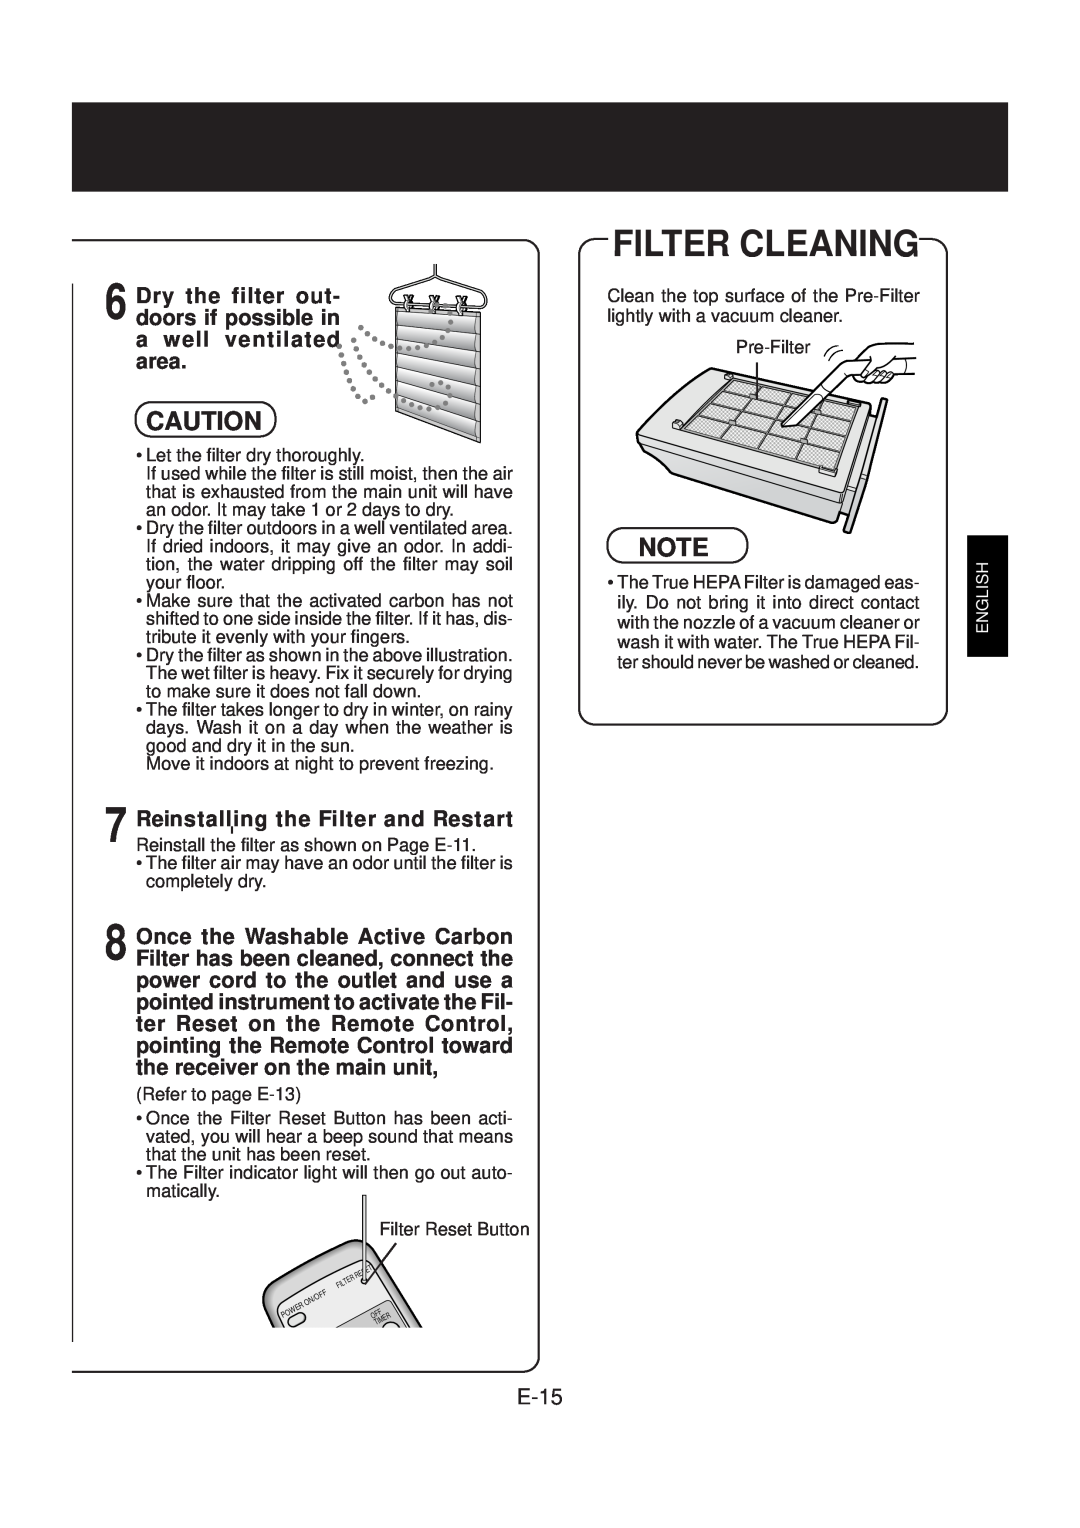 Sharp FP-N40CX operation manual Filter Cleaning, E-15 